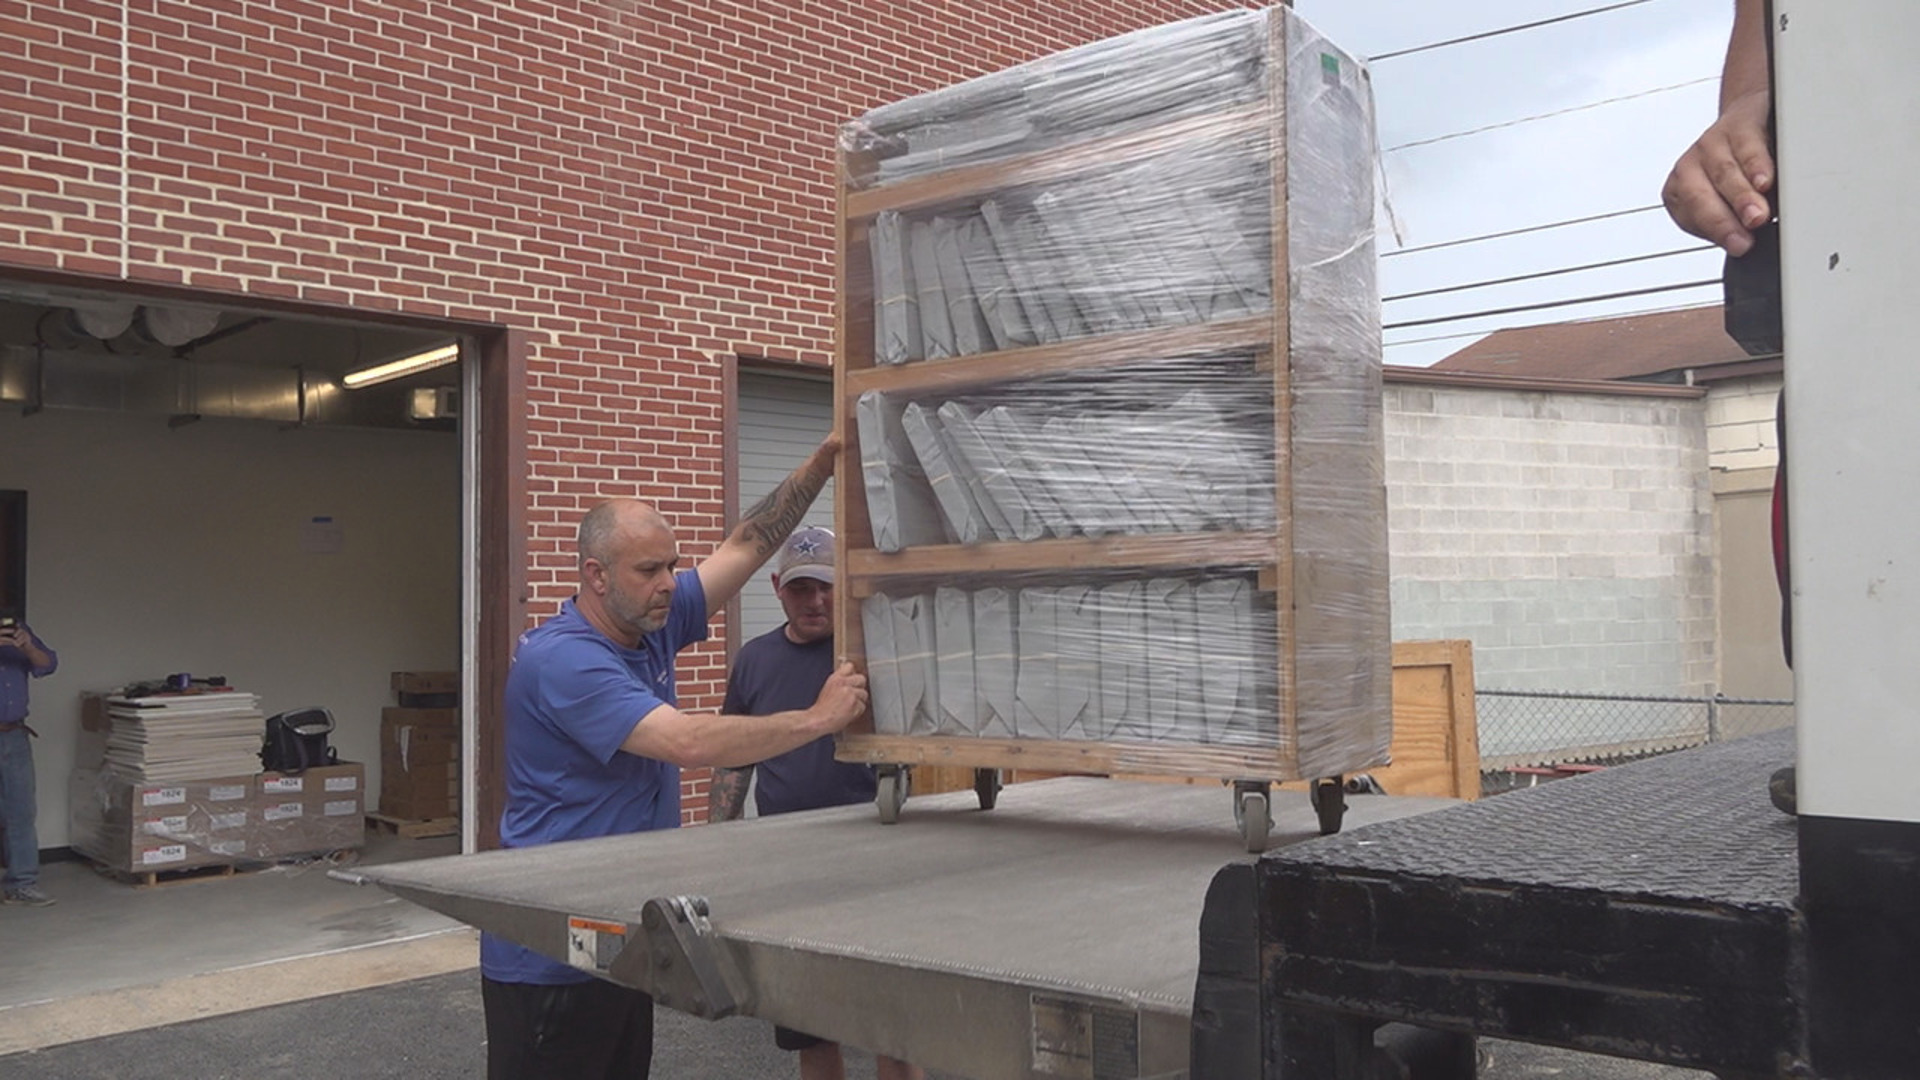 Workers will be moving thousands of priceless documents from the York History Center's old museum along East Market St. to its new location on North Pershing St.